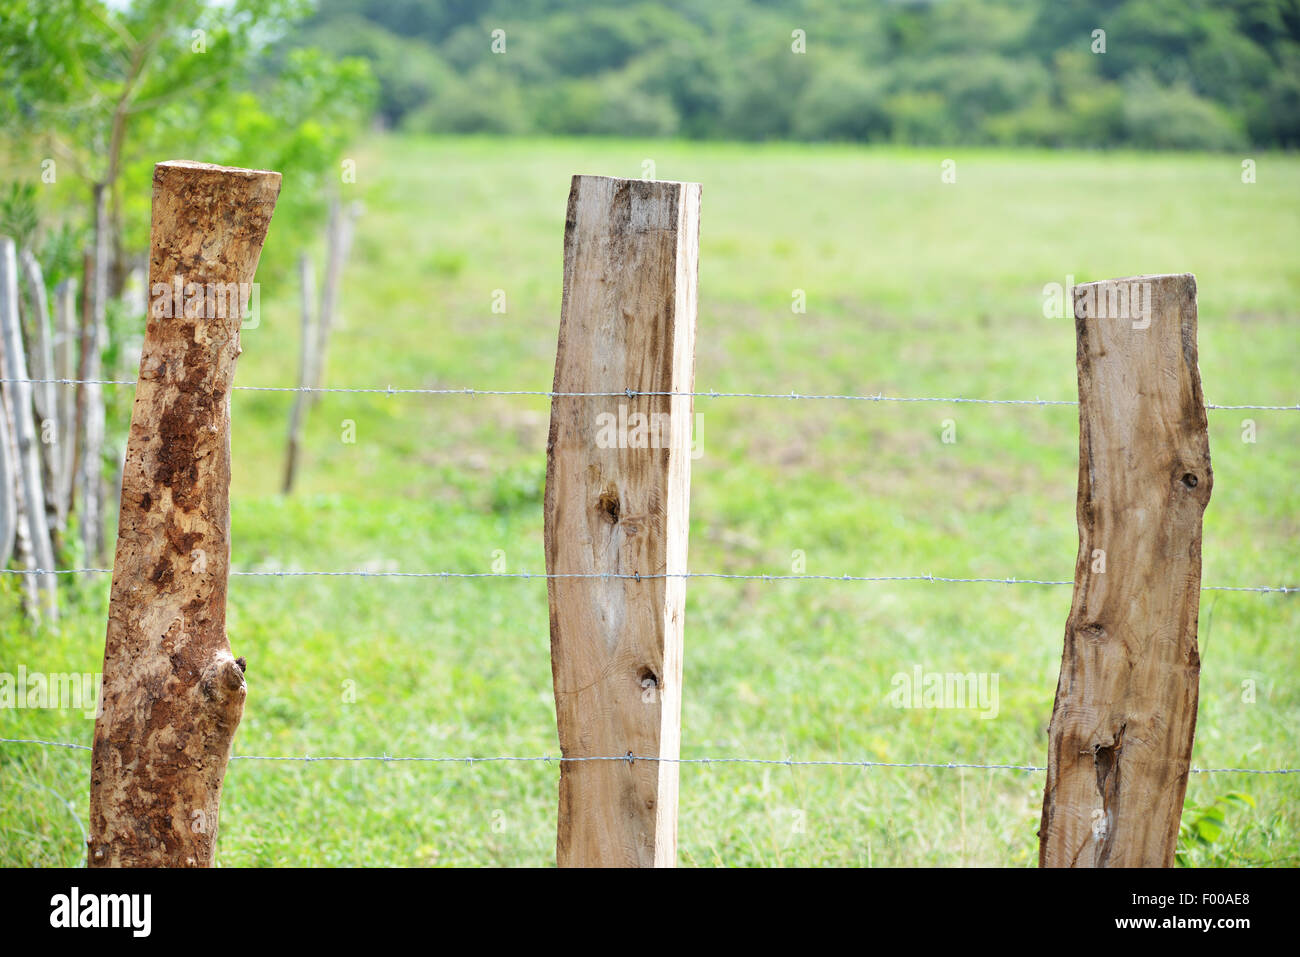 Close up of a rural barbed wire fence with wooden posts Stock Photo